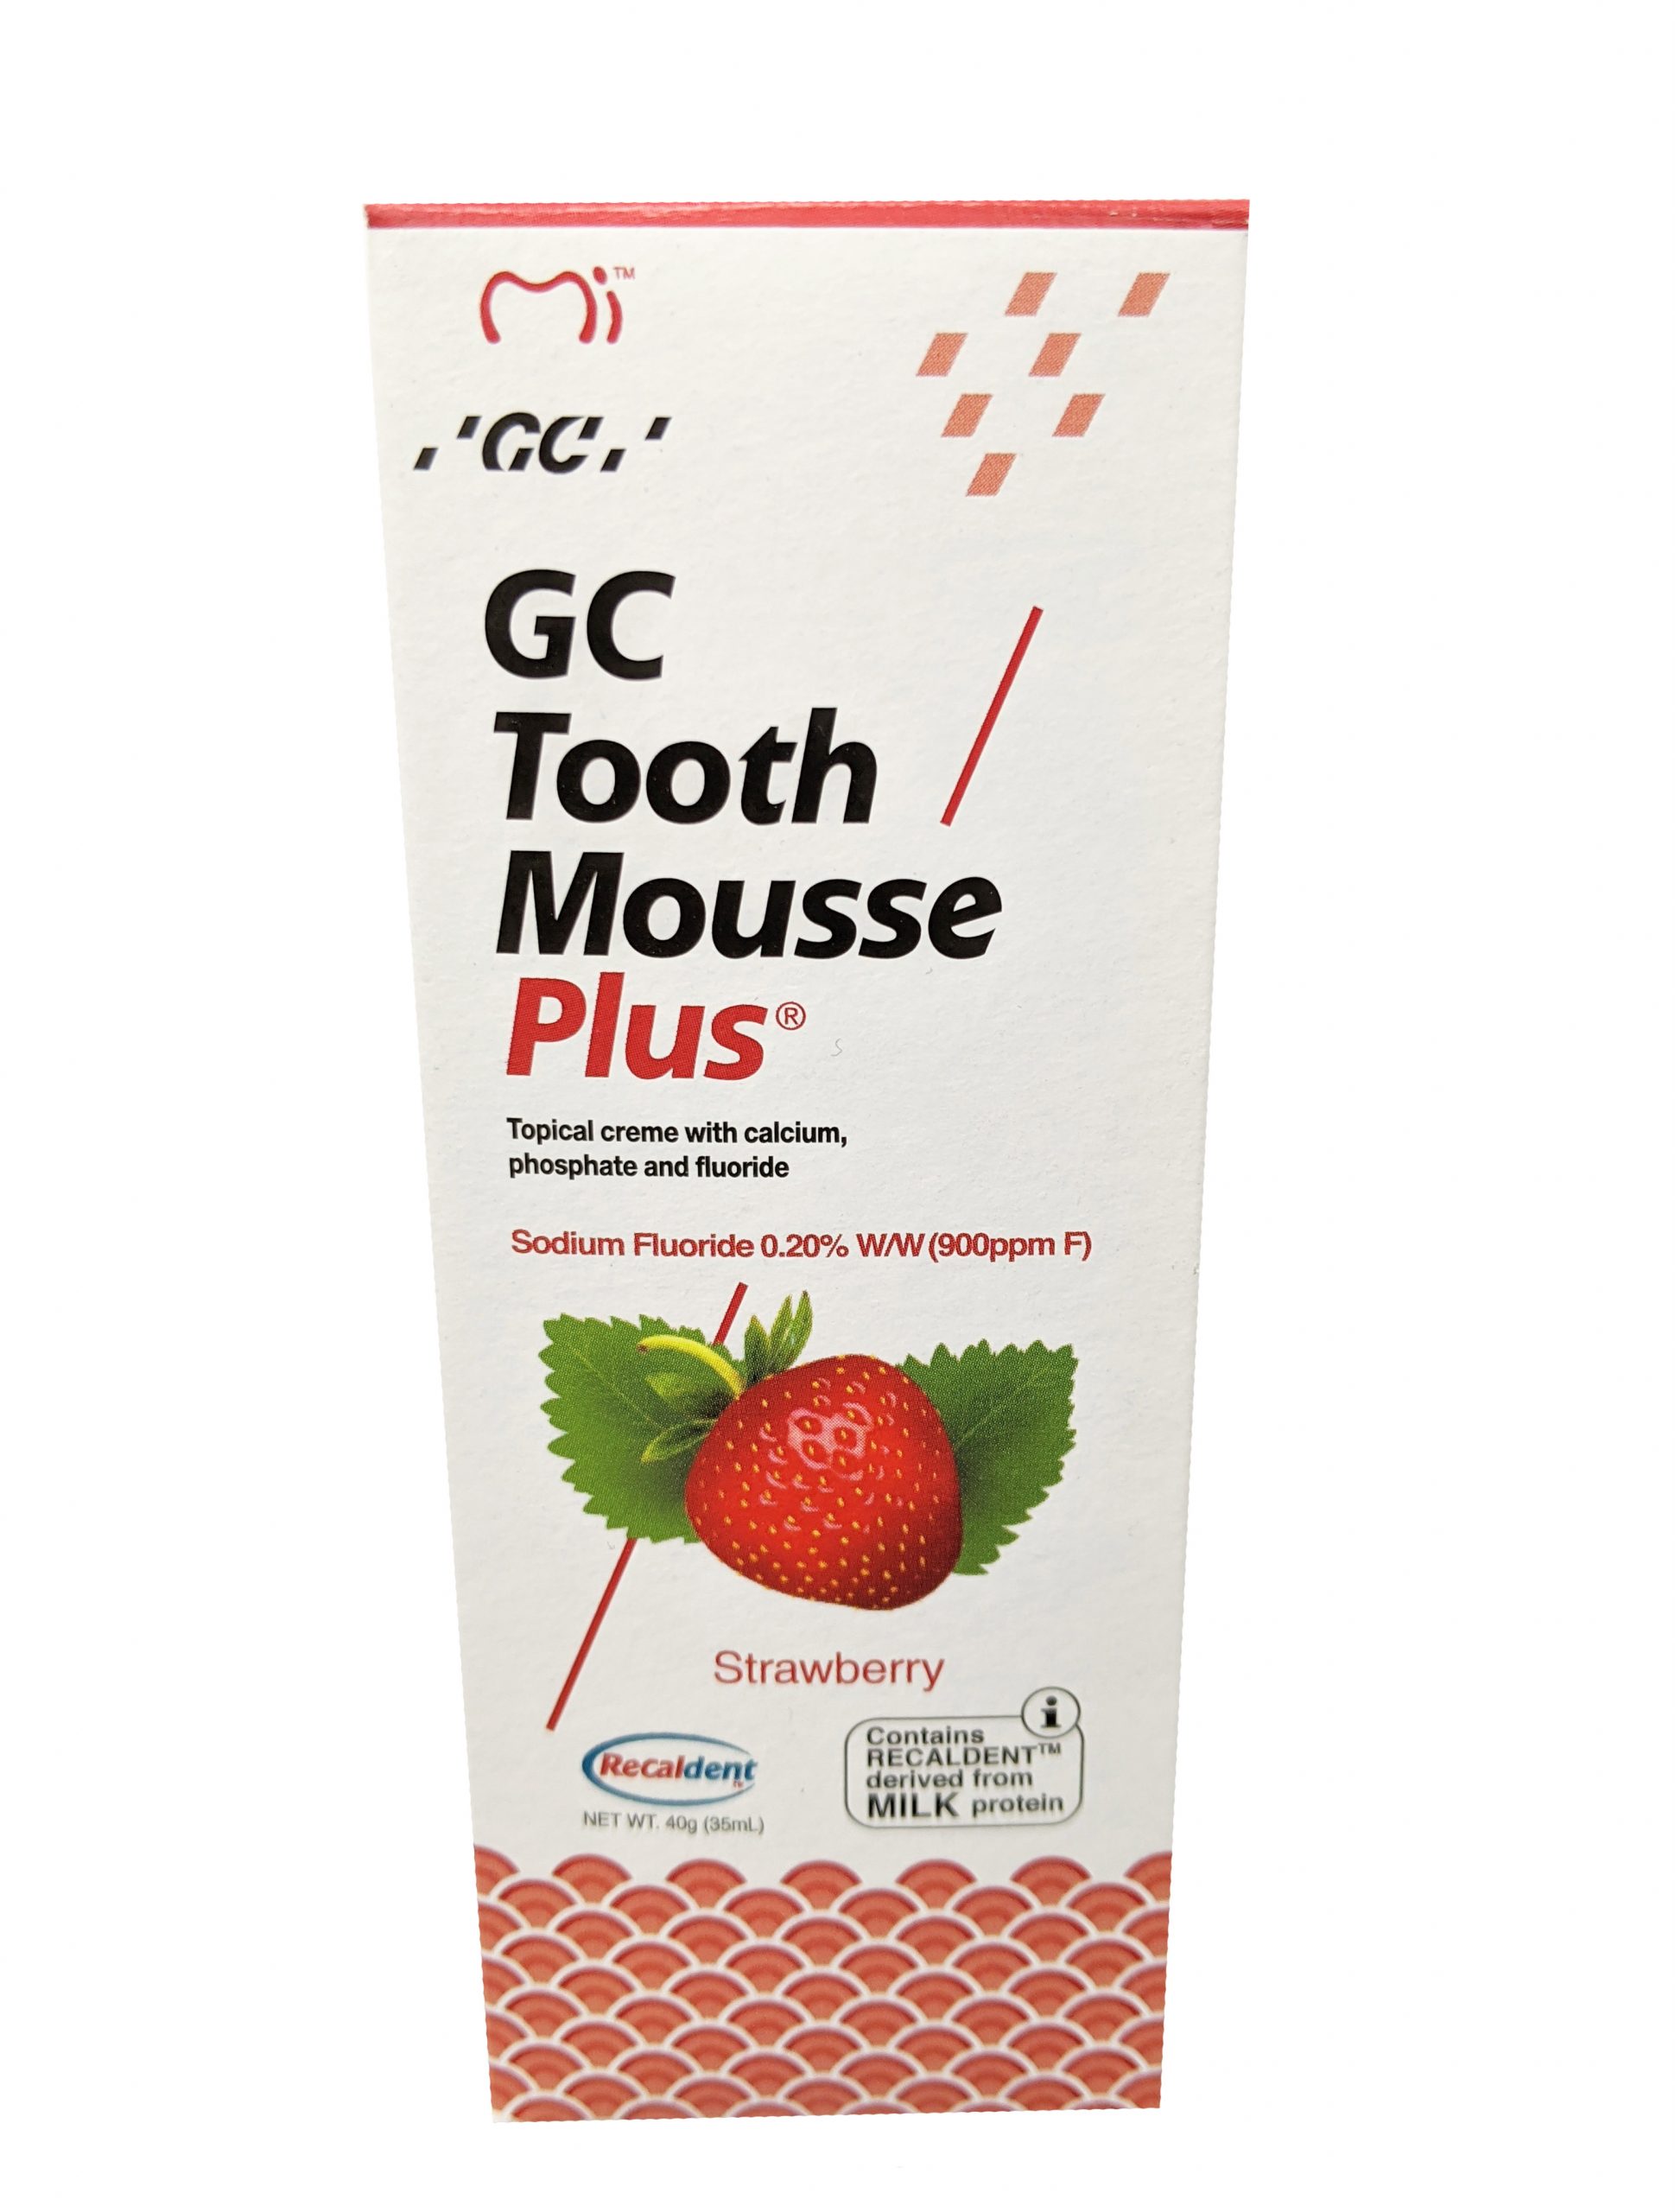 GC's Tooth Mousse and Tooth Mousse Plus